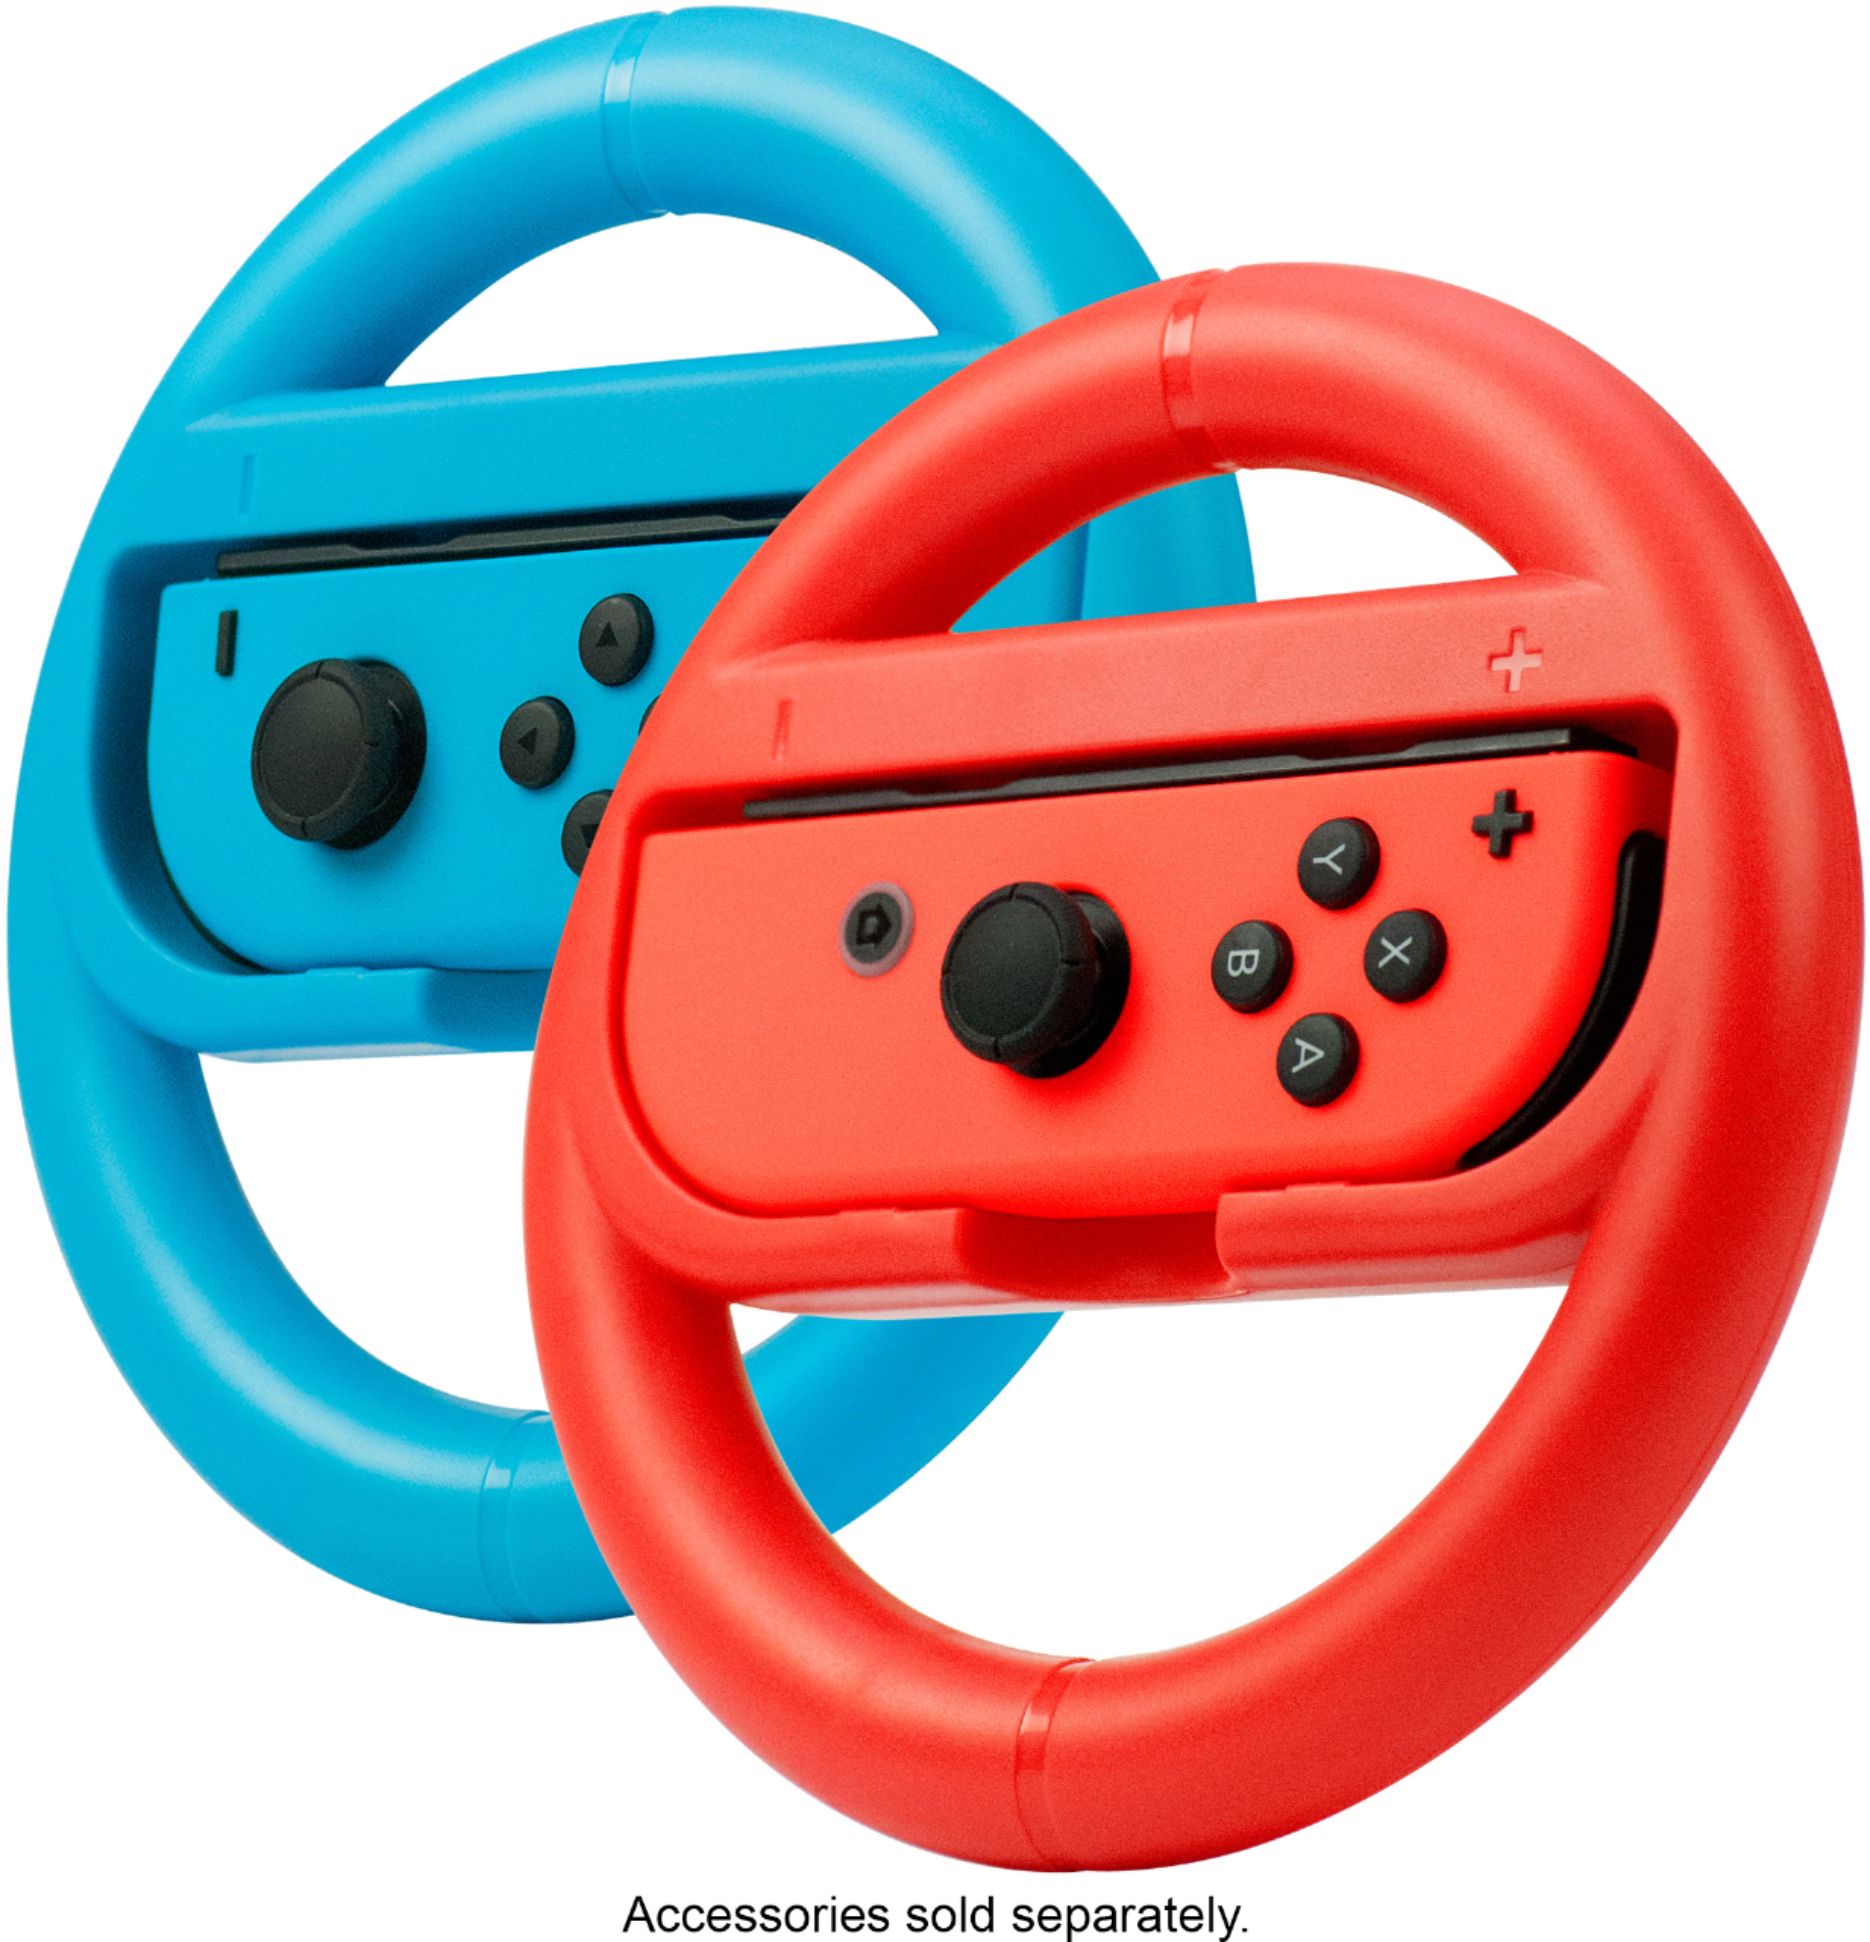 Joy Con Racing Wheel Rocketfish Two Pack For Nintendo Switch & Switch OLED - Red/Blue $5.99 @ Best Buy + Free PU